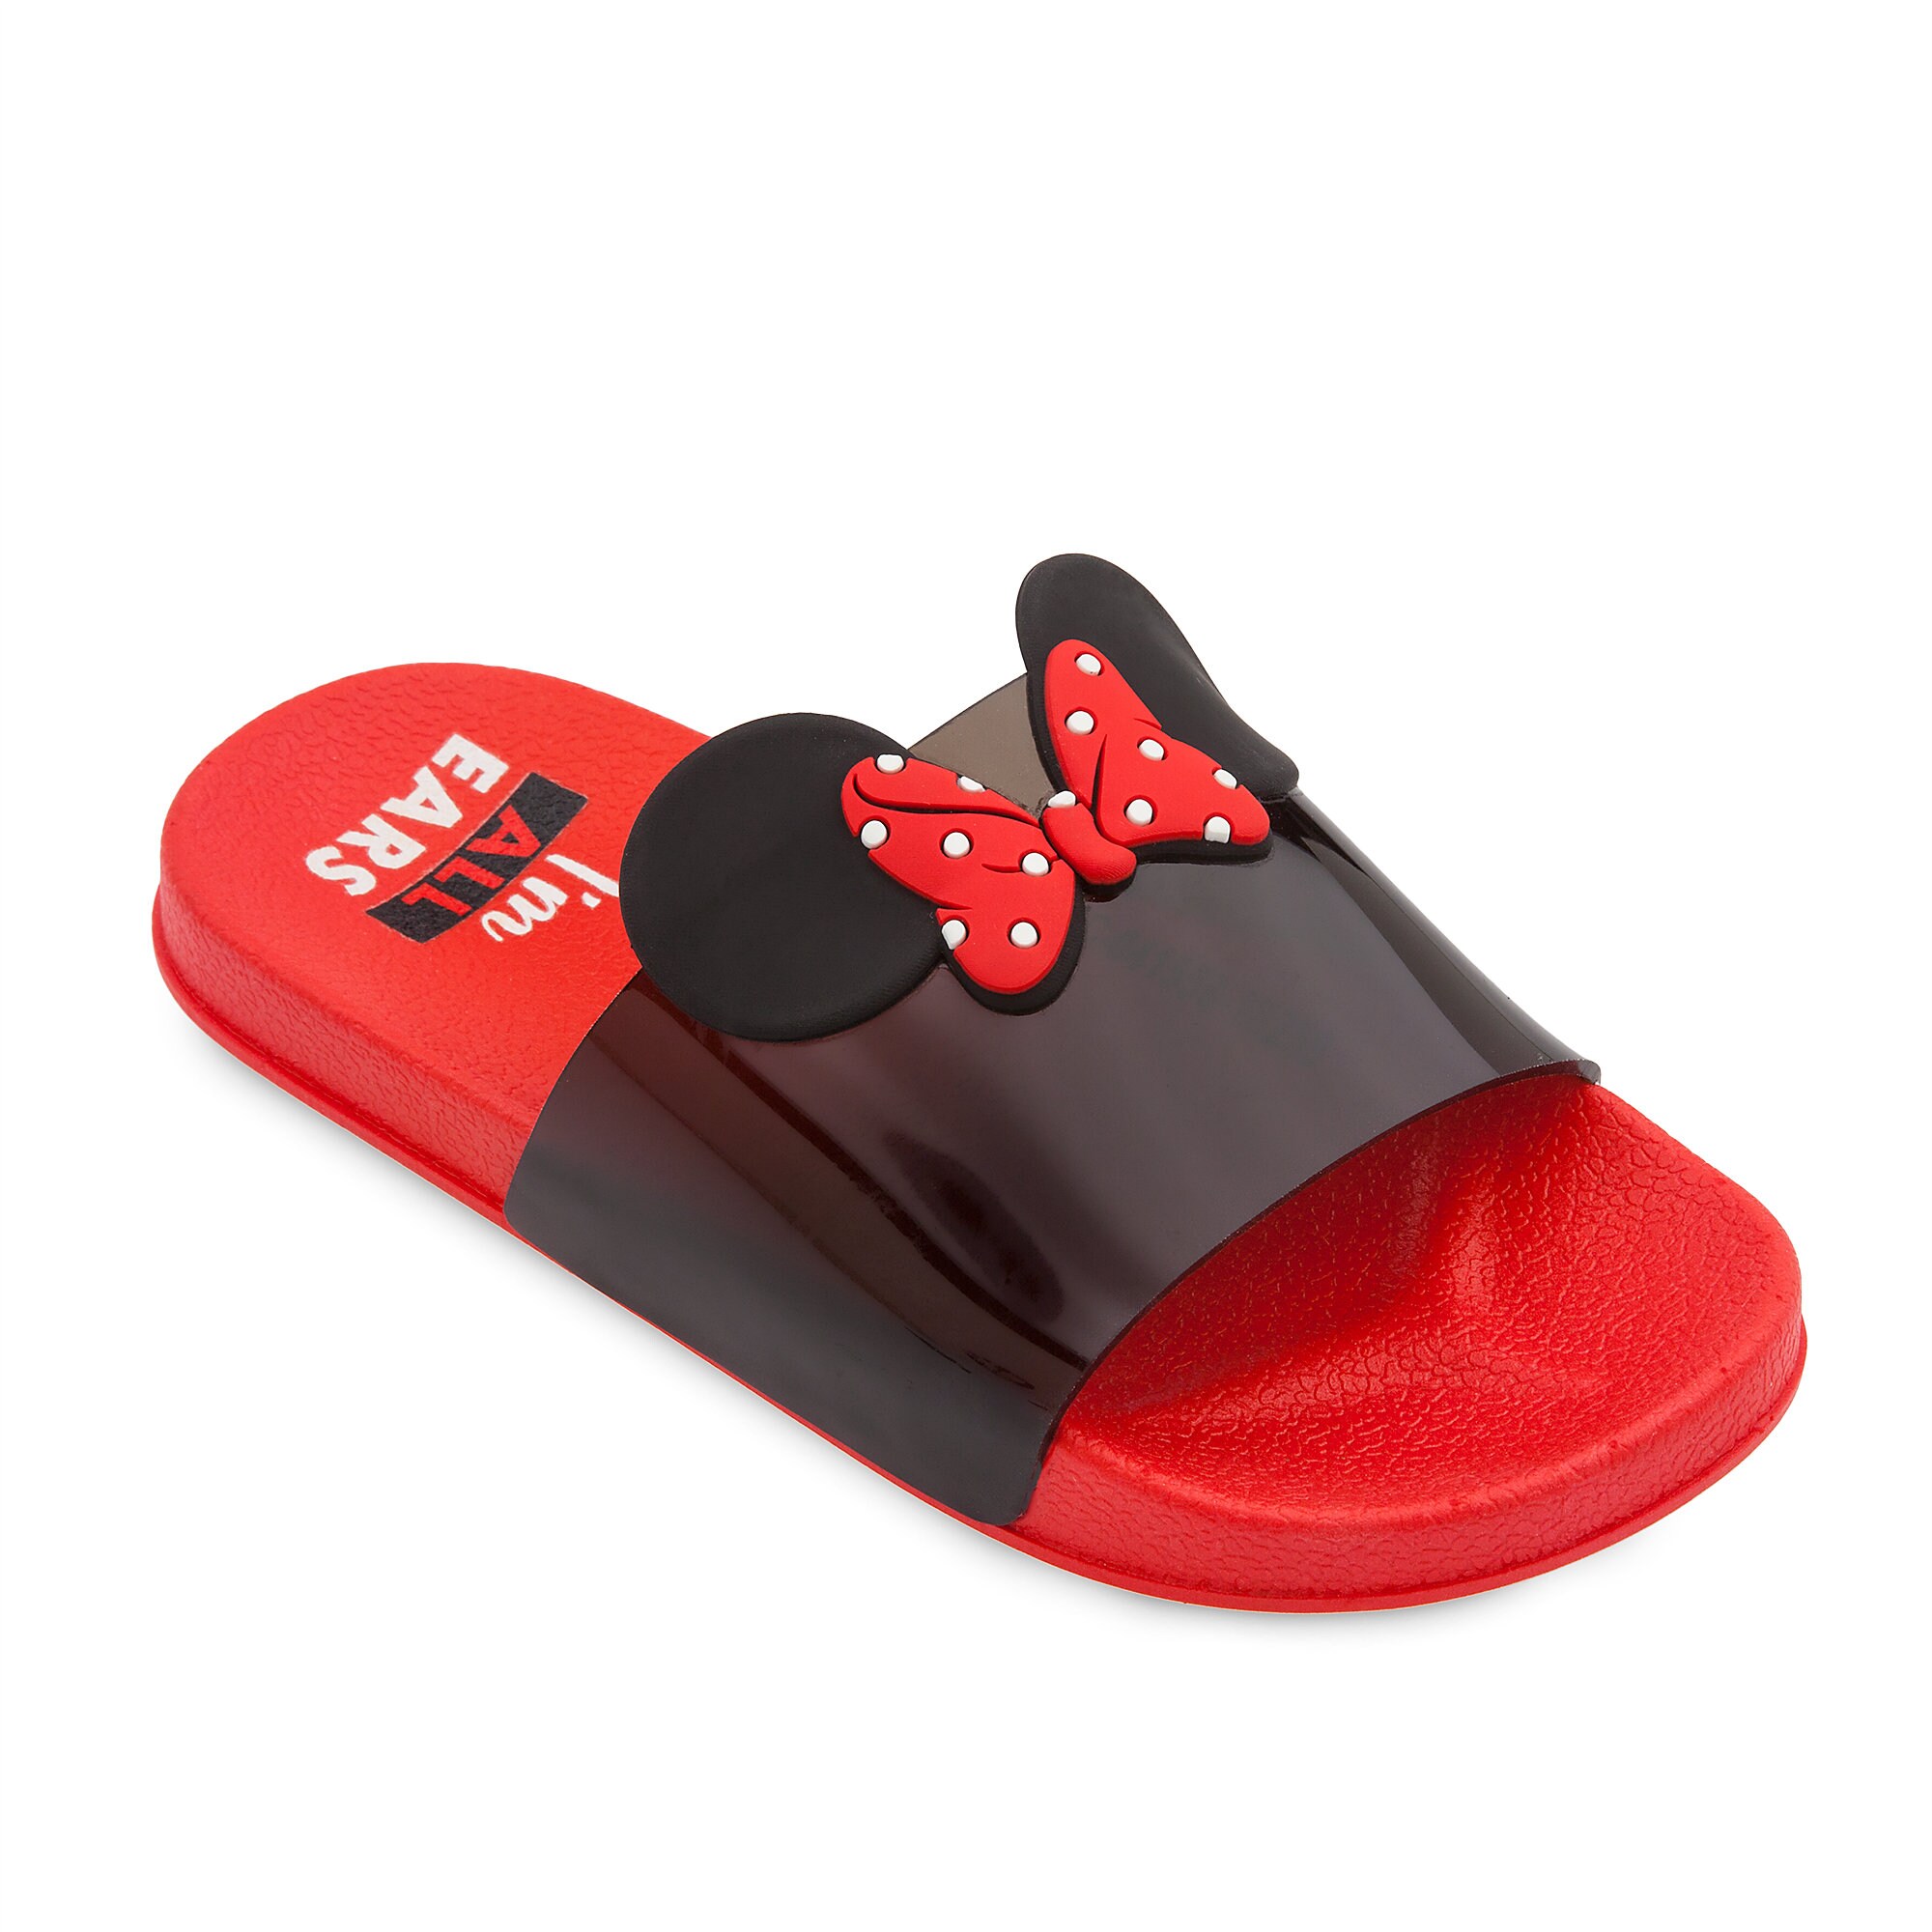 Minnie Mouse Slides for Kids - Red